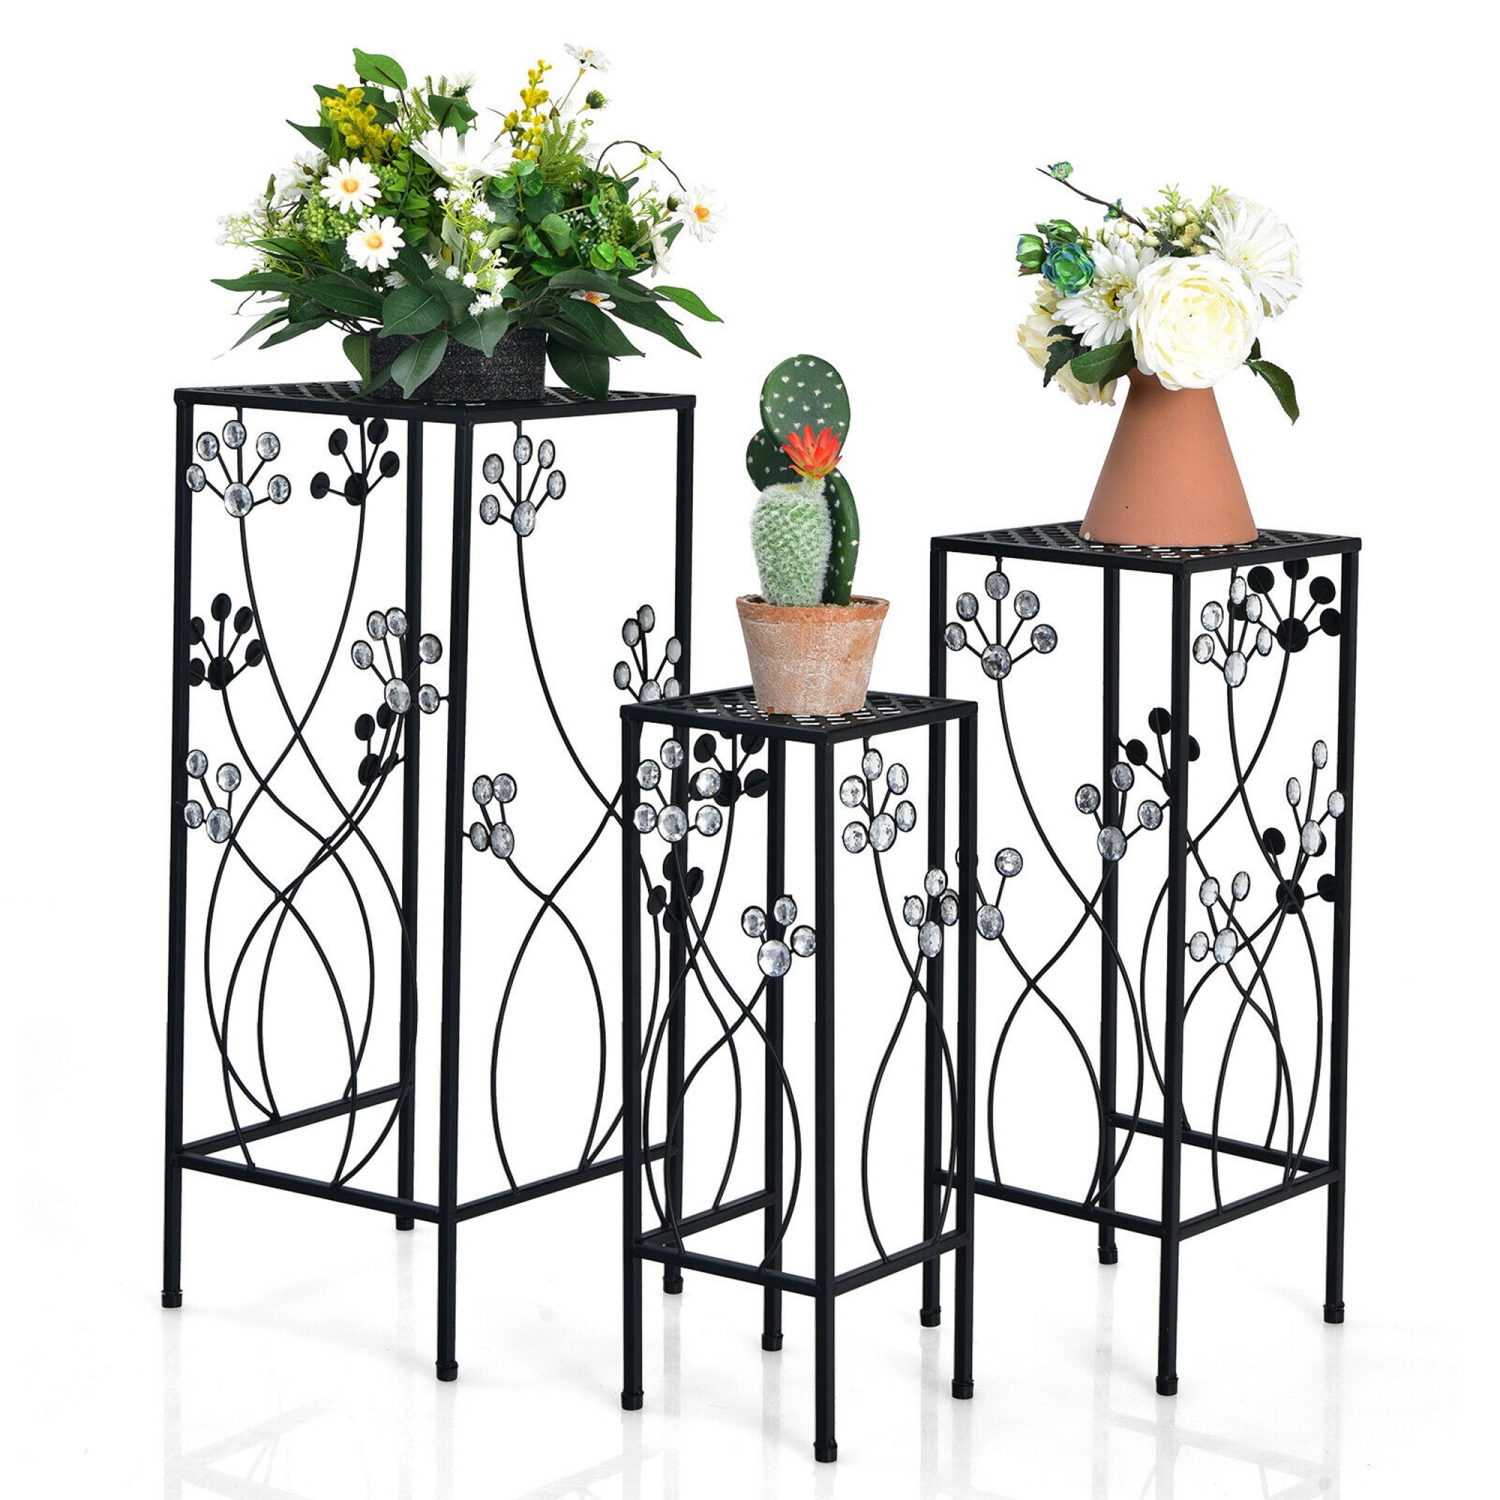 Gymax 3 Pcs Metal Plant Stand Set Plant Pot Holder w/Crystal Floral Accents Square